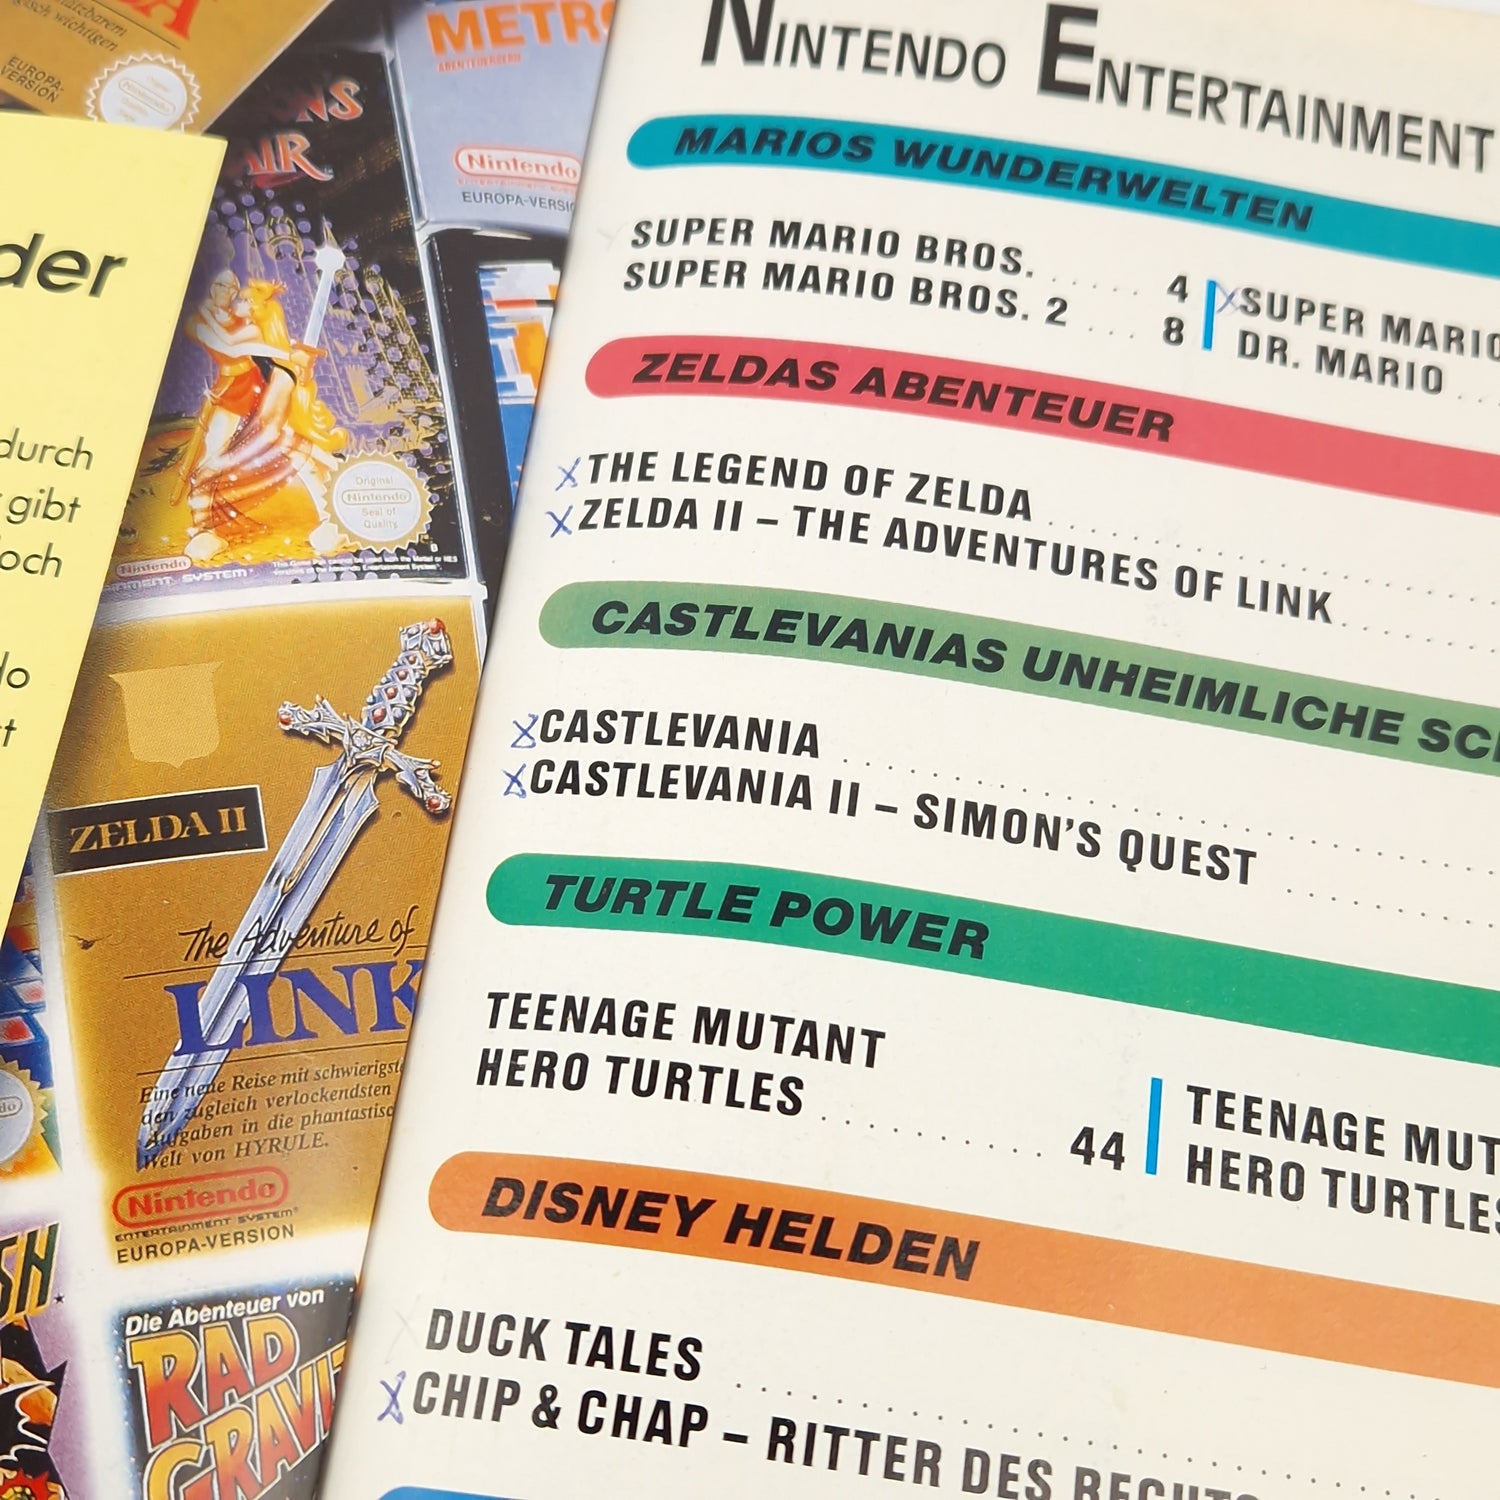 The Official Nintendo Entertainment System Game Guide - NES Solution Book